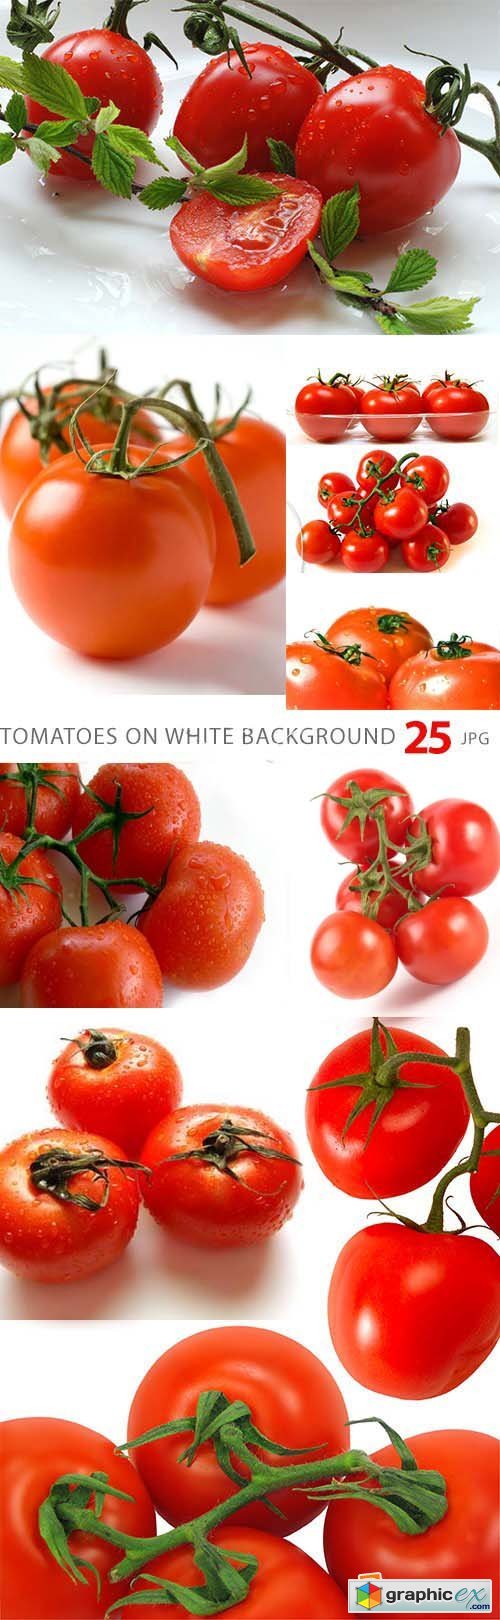 Tomatoes on White Background 25xJPG